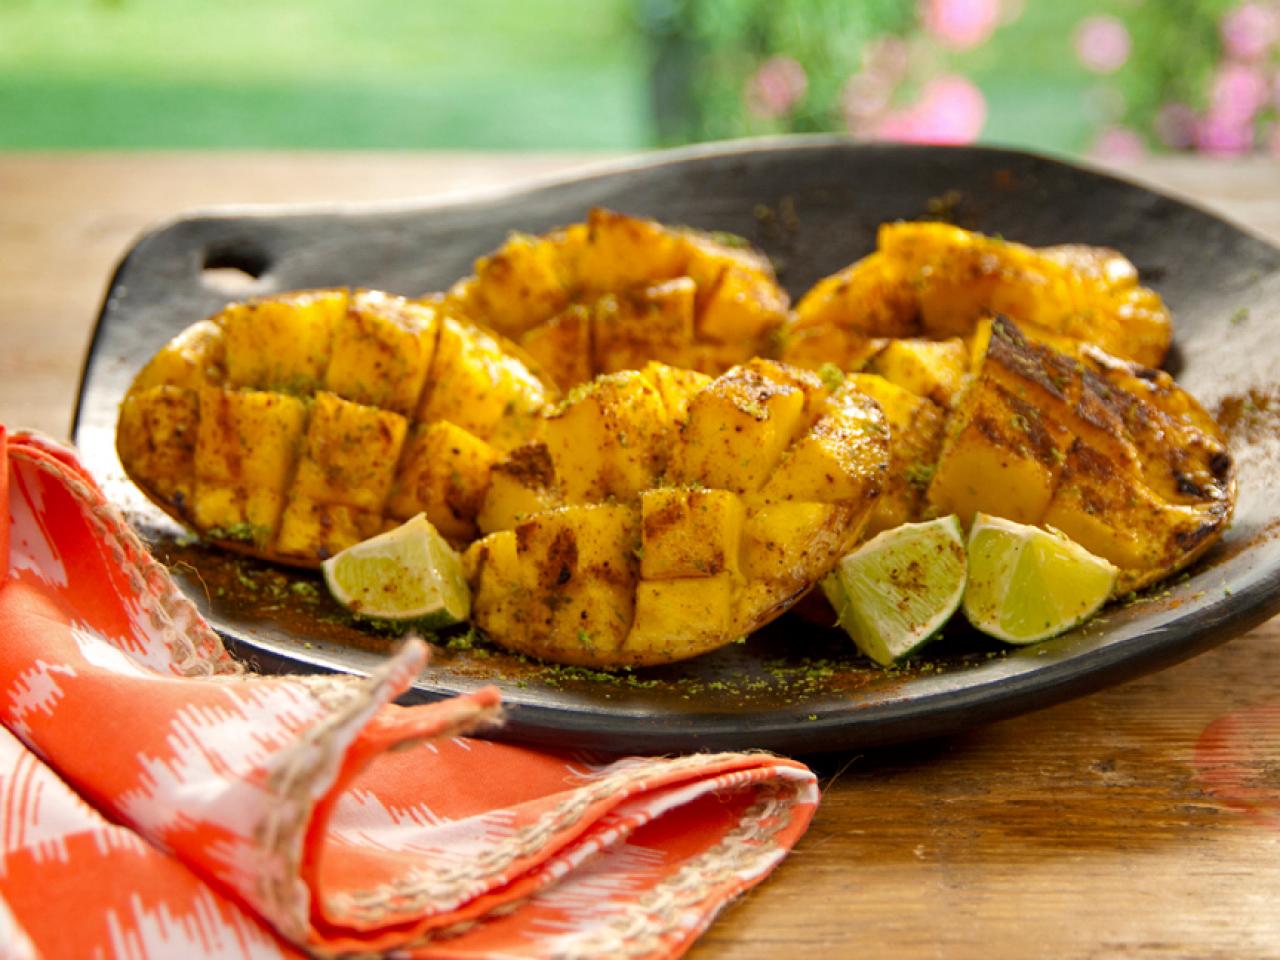 https://food.fnr.sndimg.com/content/dam/images/food/fullset/2012/6/20/0/QF0209_Grilled-Mango-with-Lime-Salt-and-Ancho-Powder-Recipe_s4x3.jpg.rend.hgtvcom.1280.960.suffix/1371606590730.jpeg